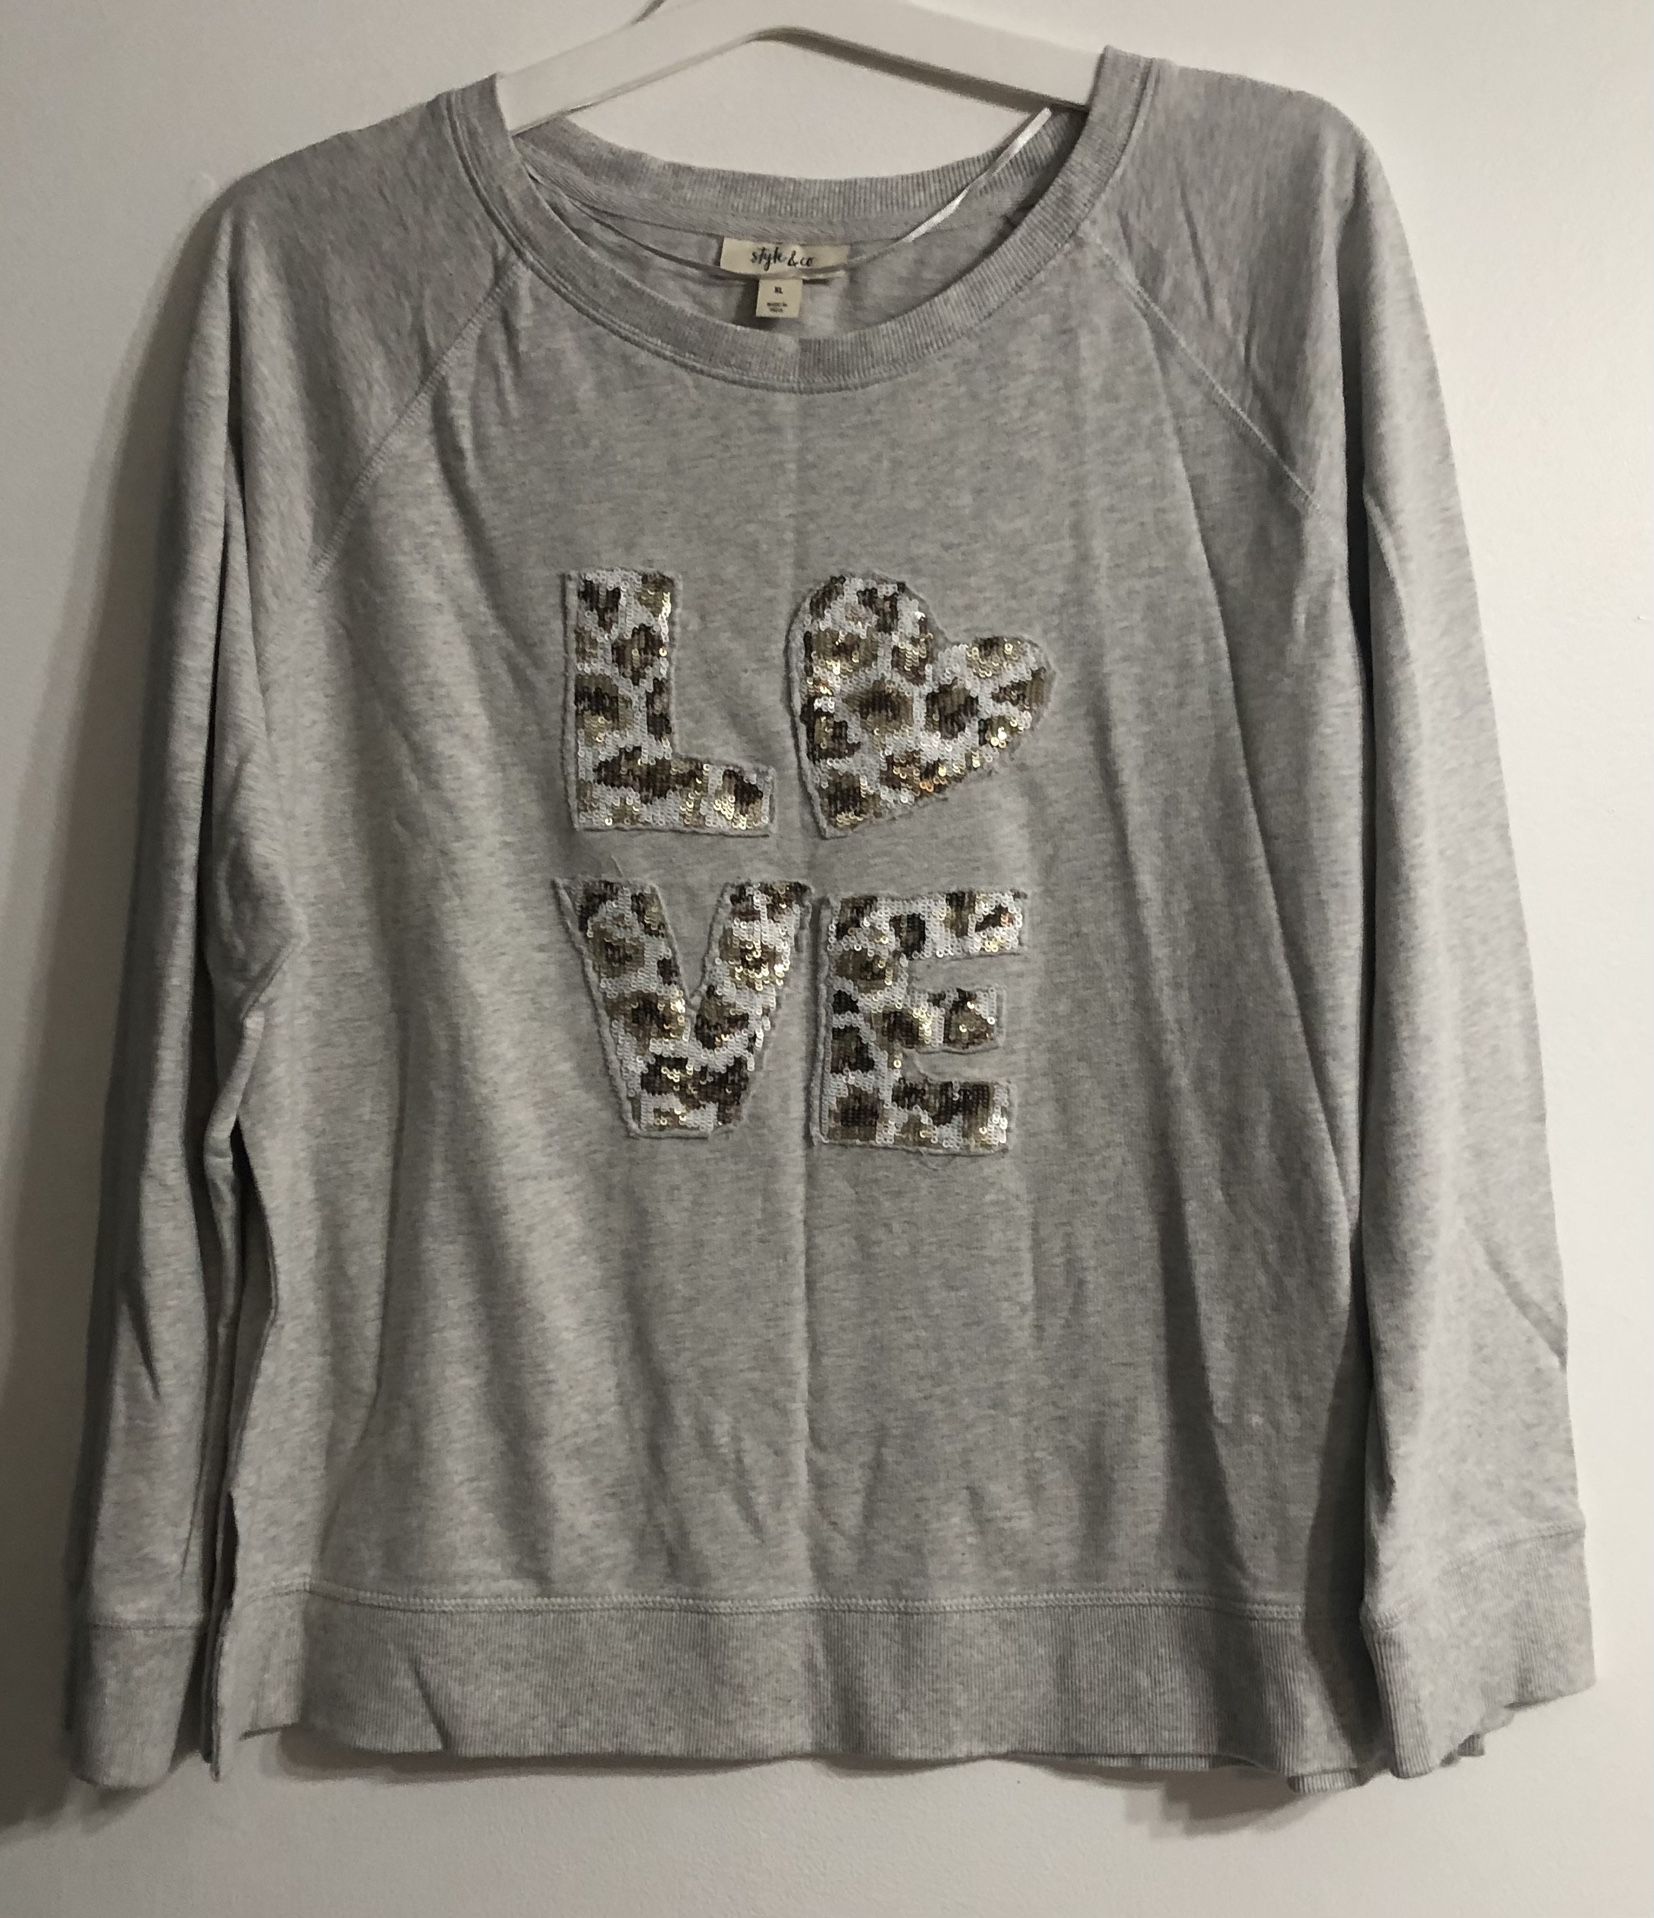 Style & Co sweatshirt for women Love Graphic crewneck soft pull over gray .XL